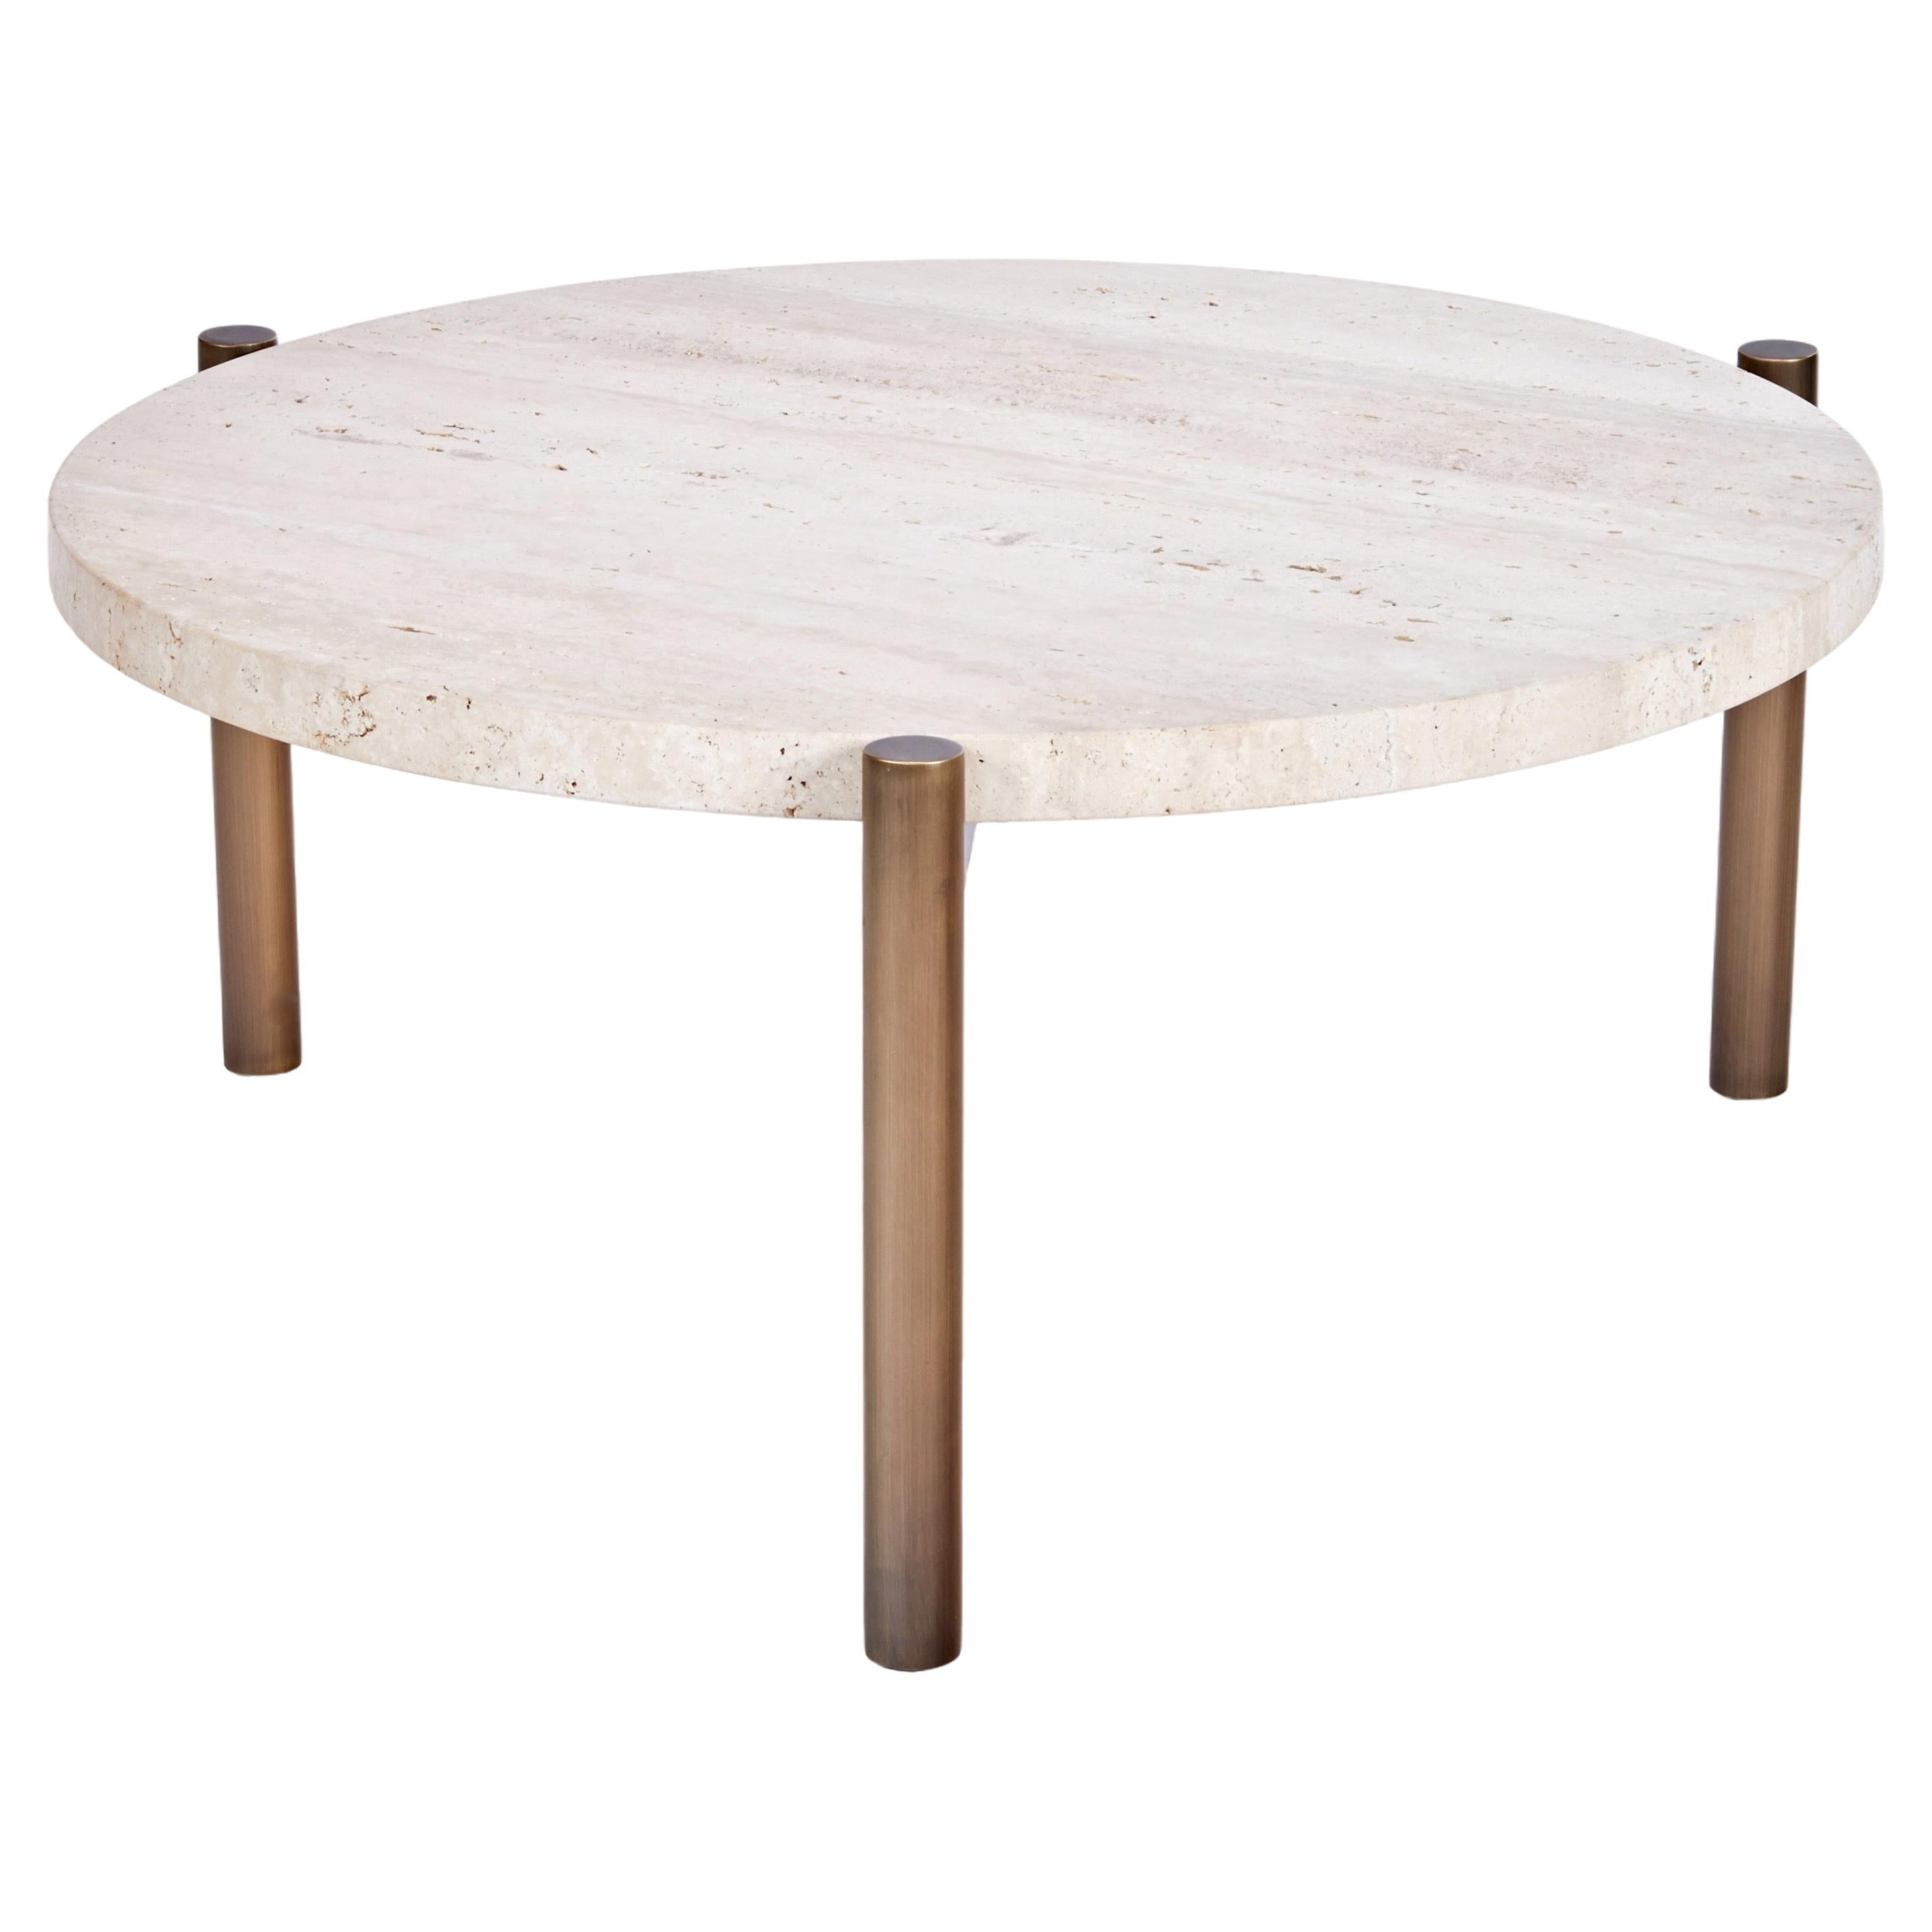 Tivoli Side Table Round 26"D 3 Legs Burnished Brass Plated Base + Travertine Top